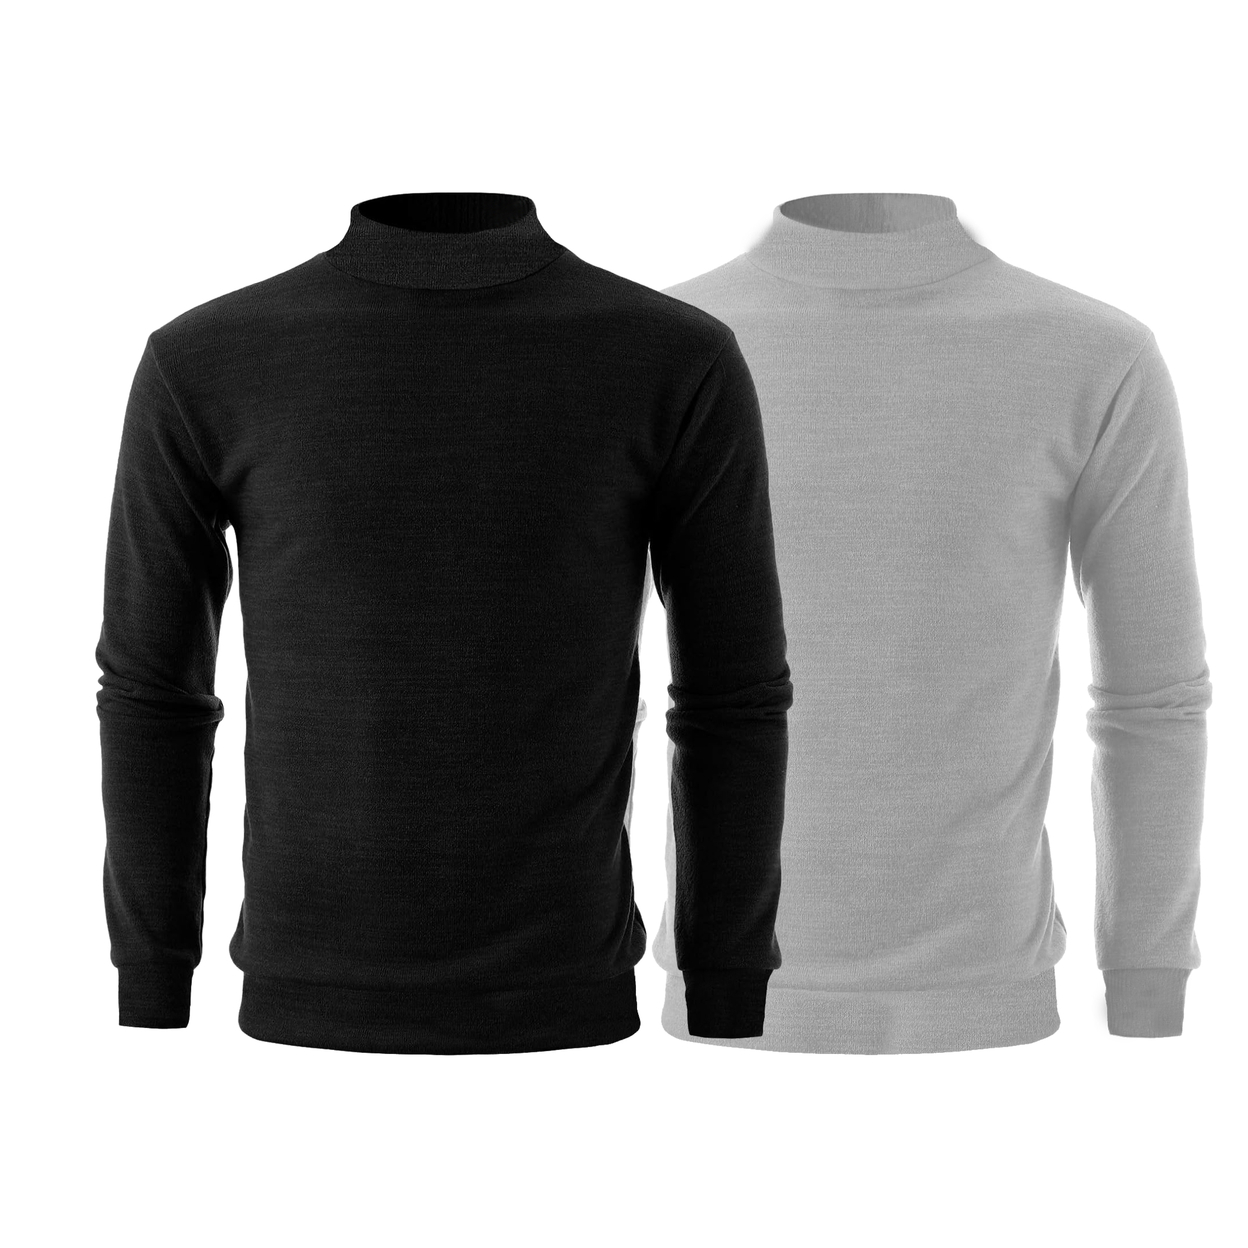 2-Pack: Men's Winter Warm Cozy Knit Slim Fit Mock Neck Sweater - White & Charcoal, X-large